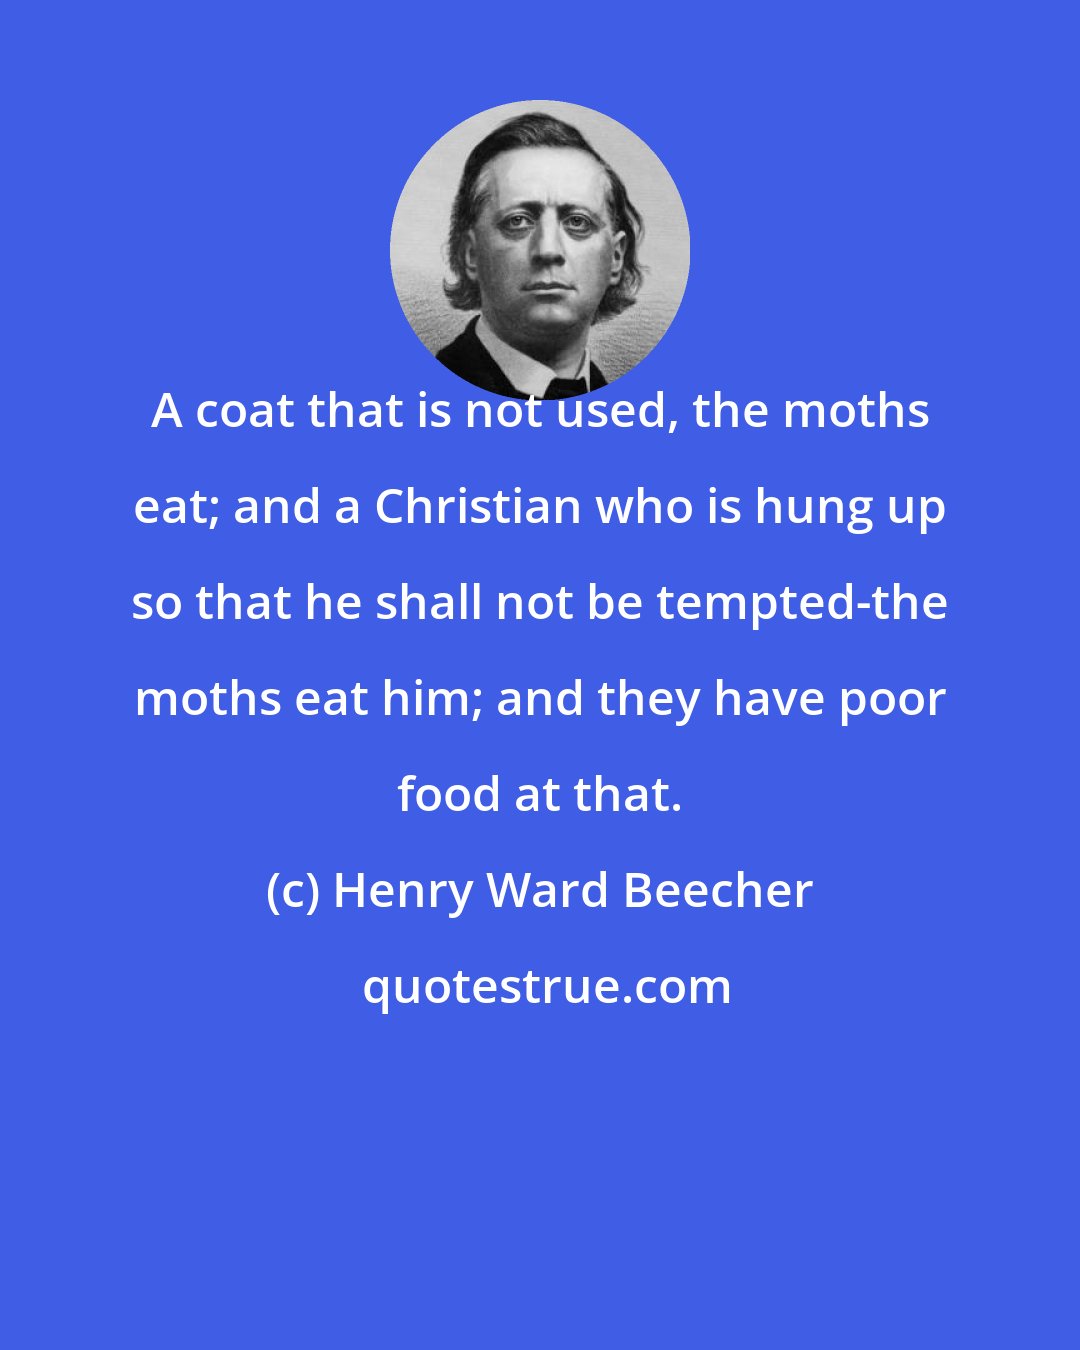 Henry Ward Beecher: A coat that is not used, the moths eat; and a Christian who is hung up so that he shall not be tempted-the moths eat him; and they have poor food at that.